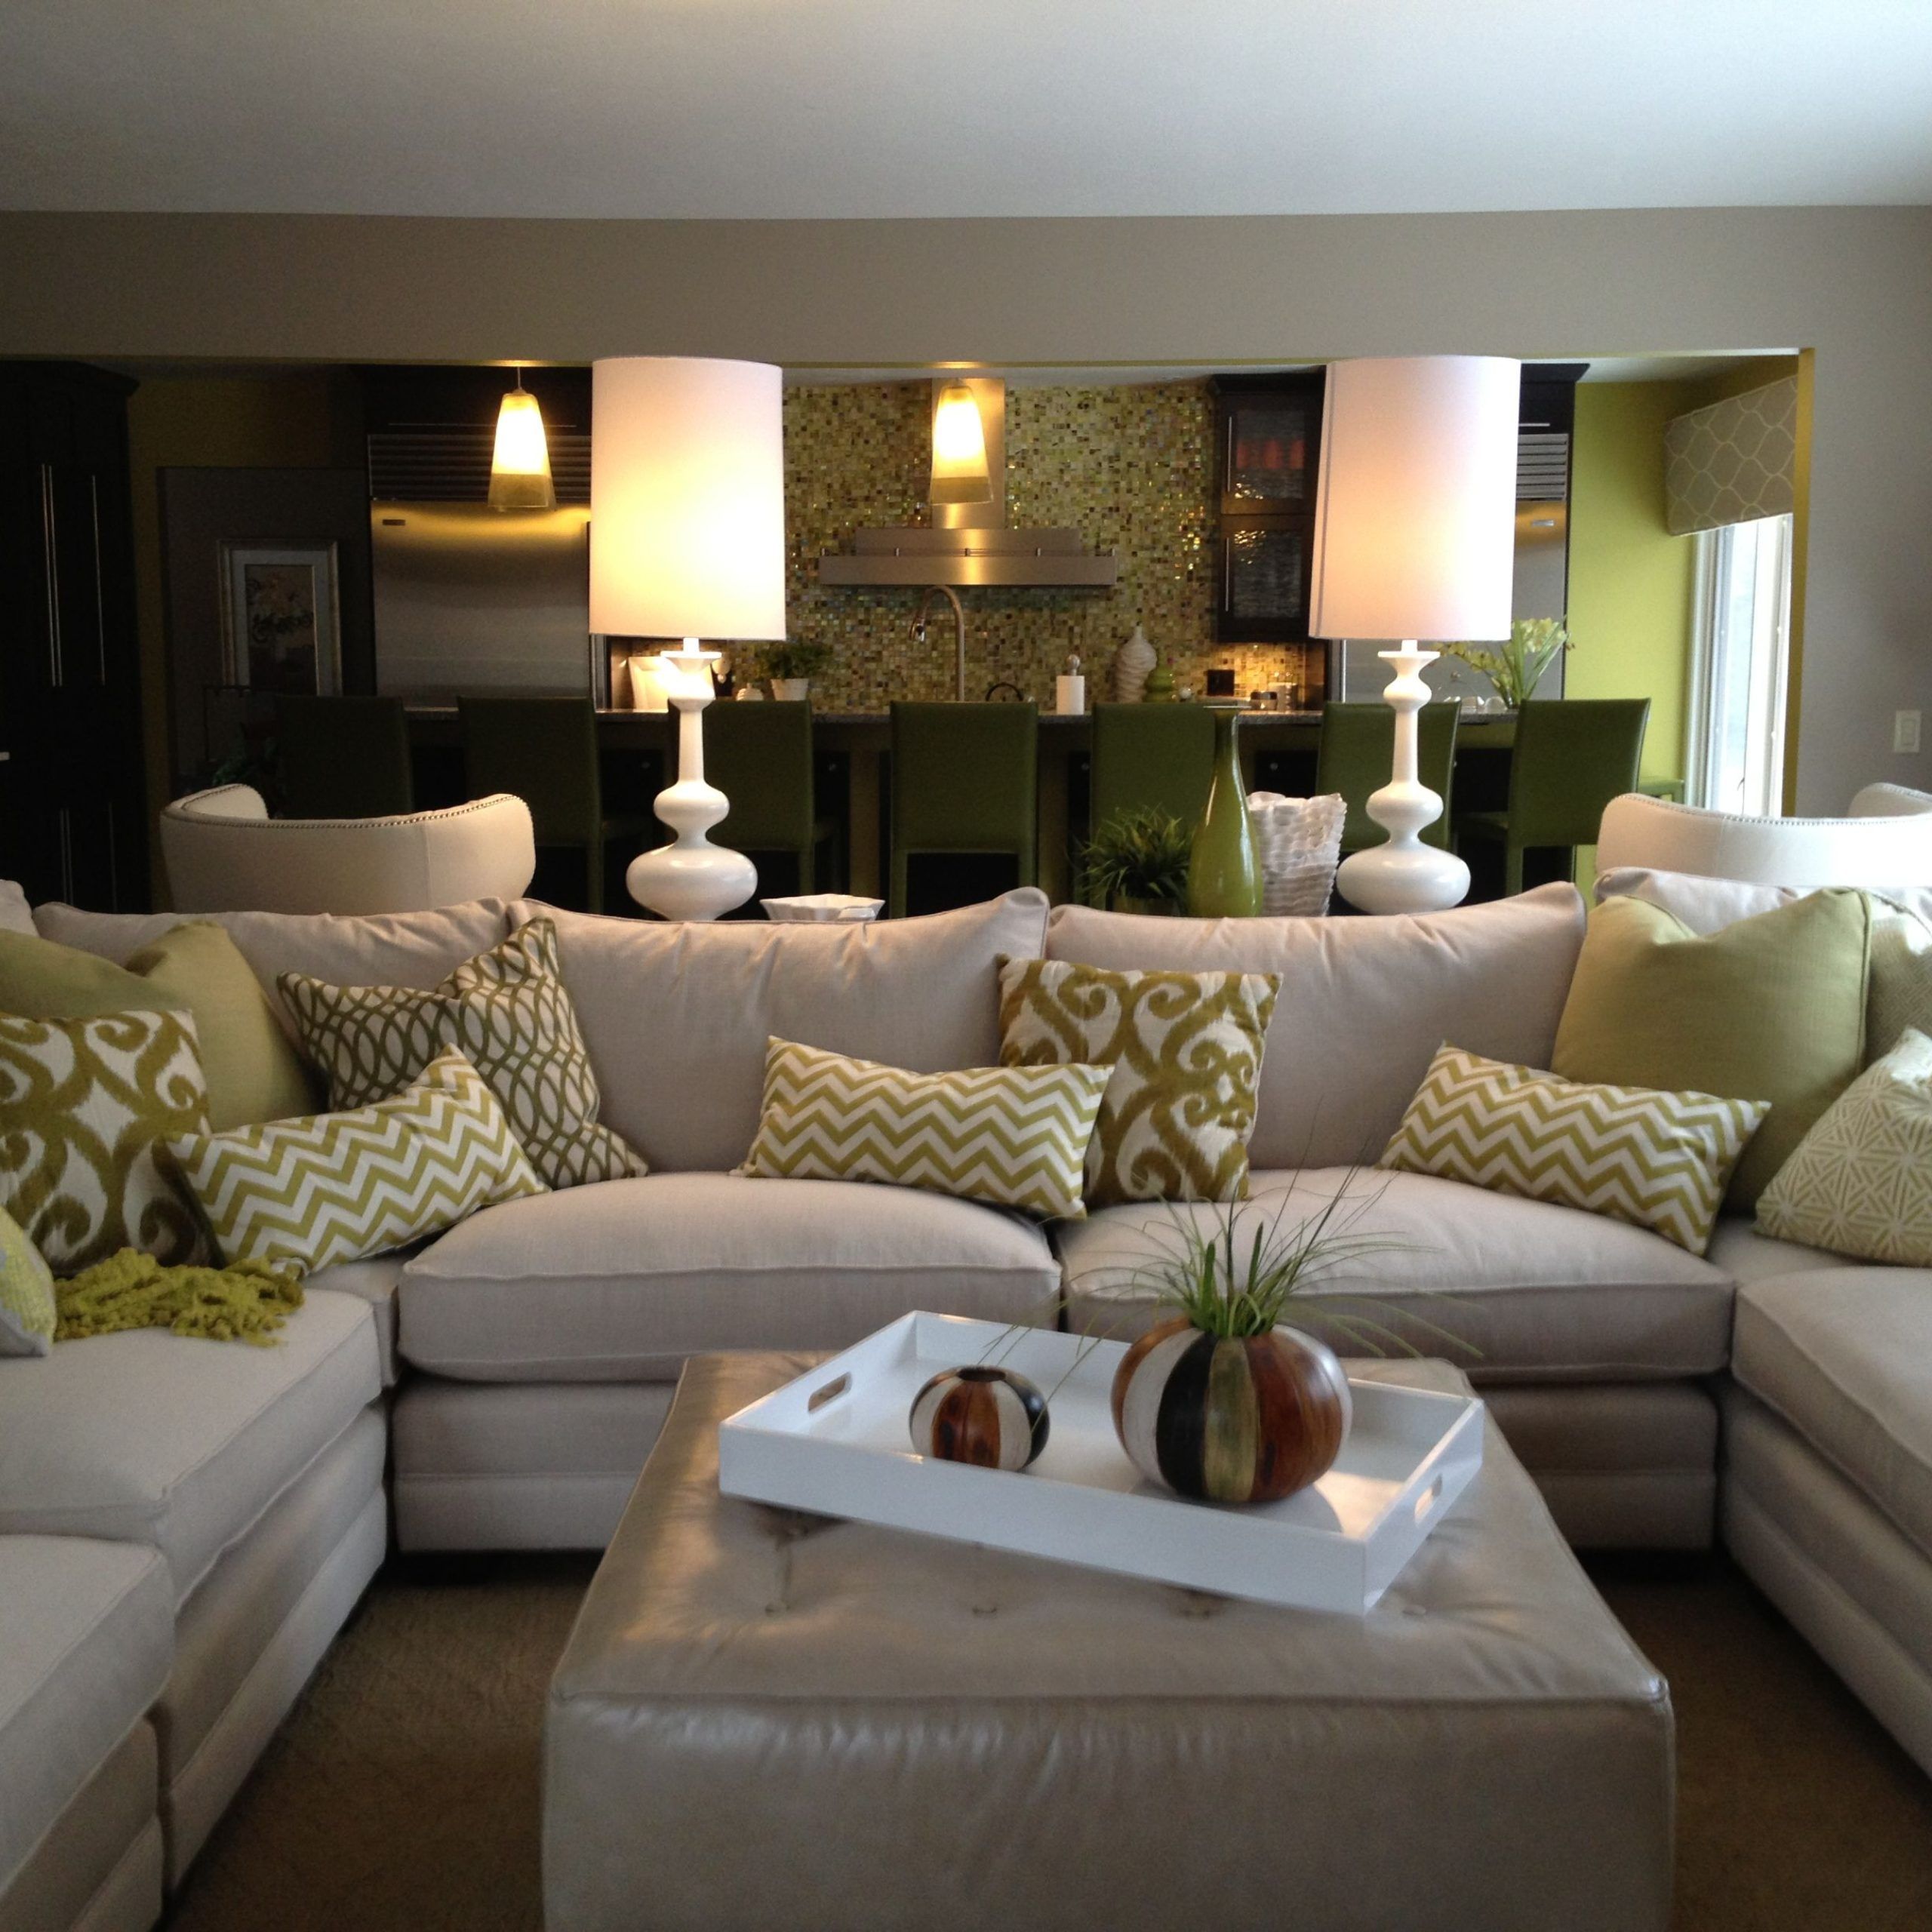 20+ U Shaped Sectional With Large Ottoman Inside U Shaped Couches In Beige (Gallery 12 of 20)